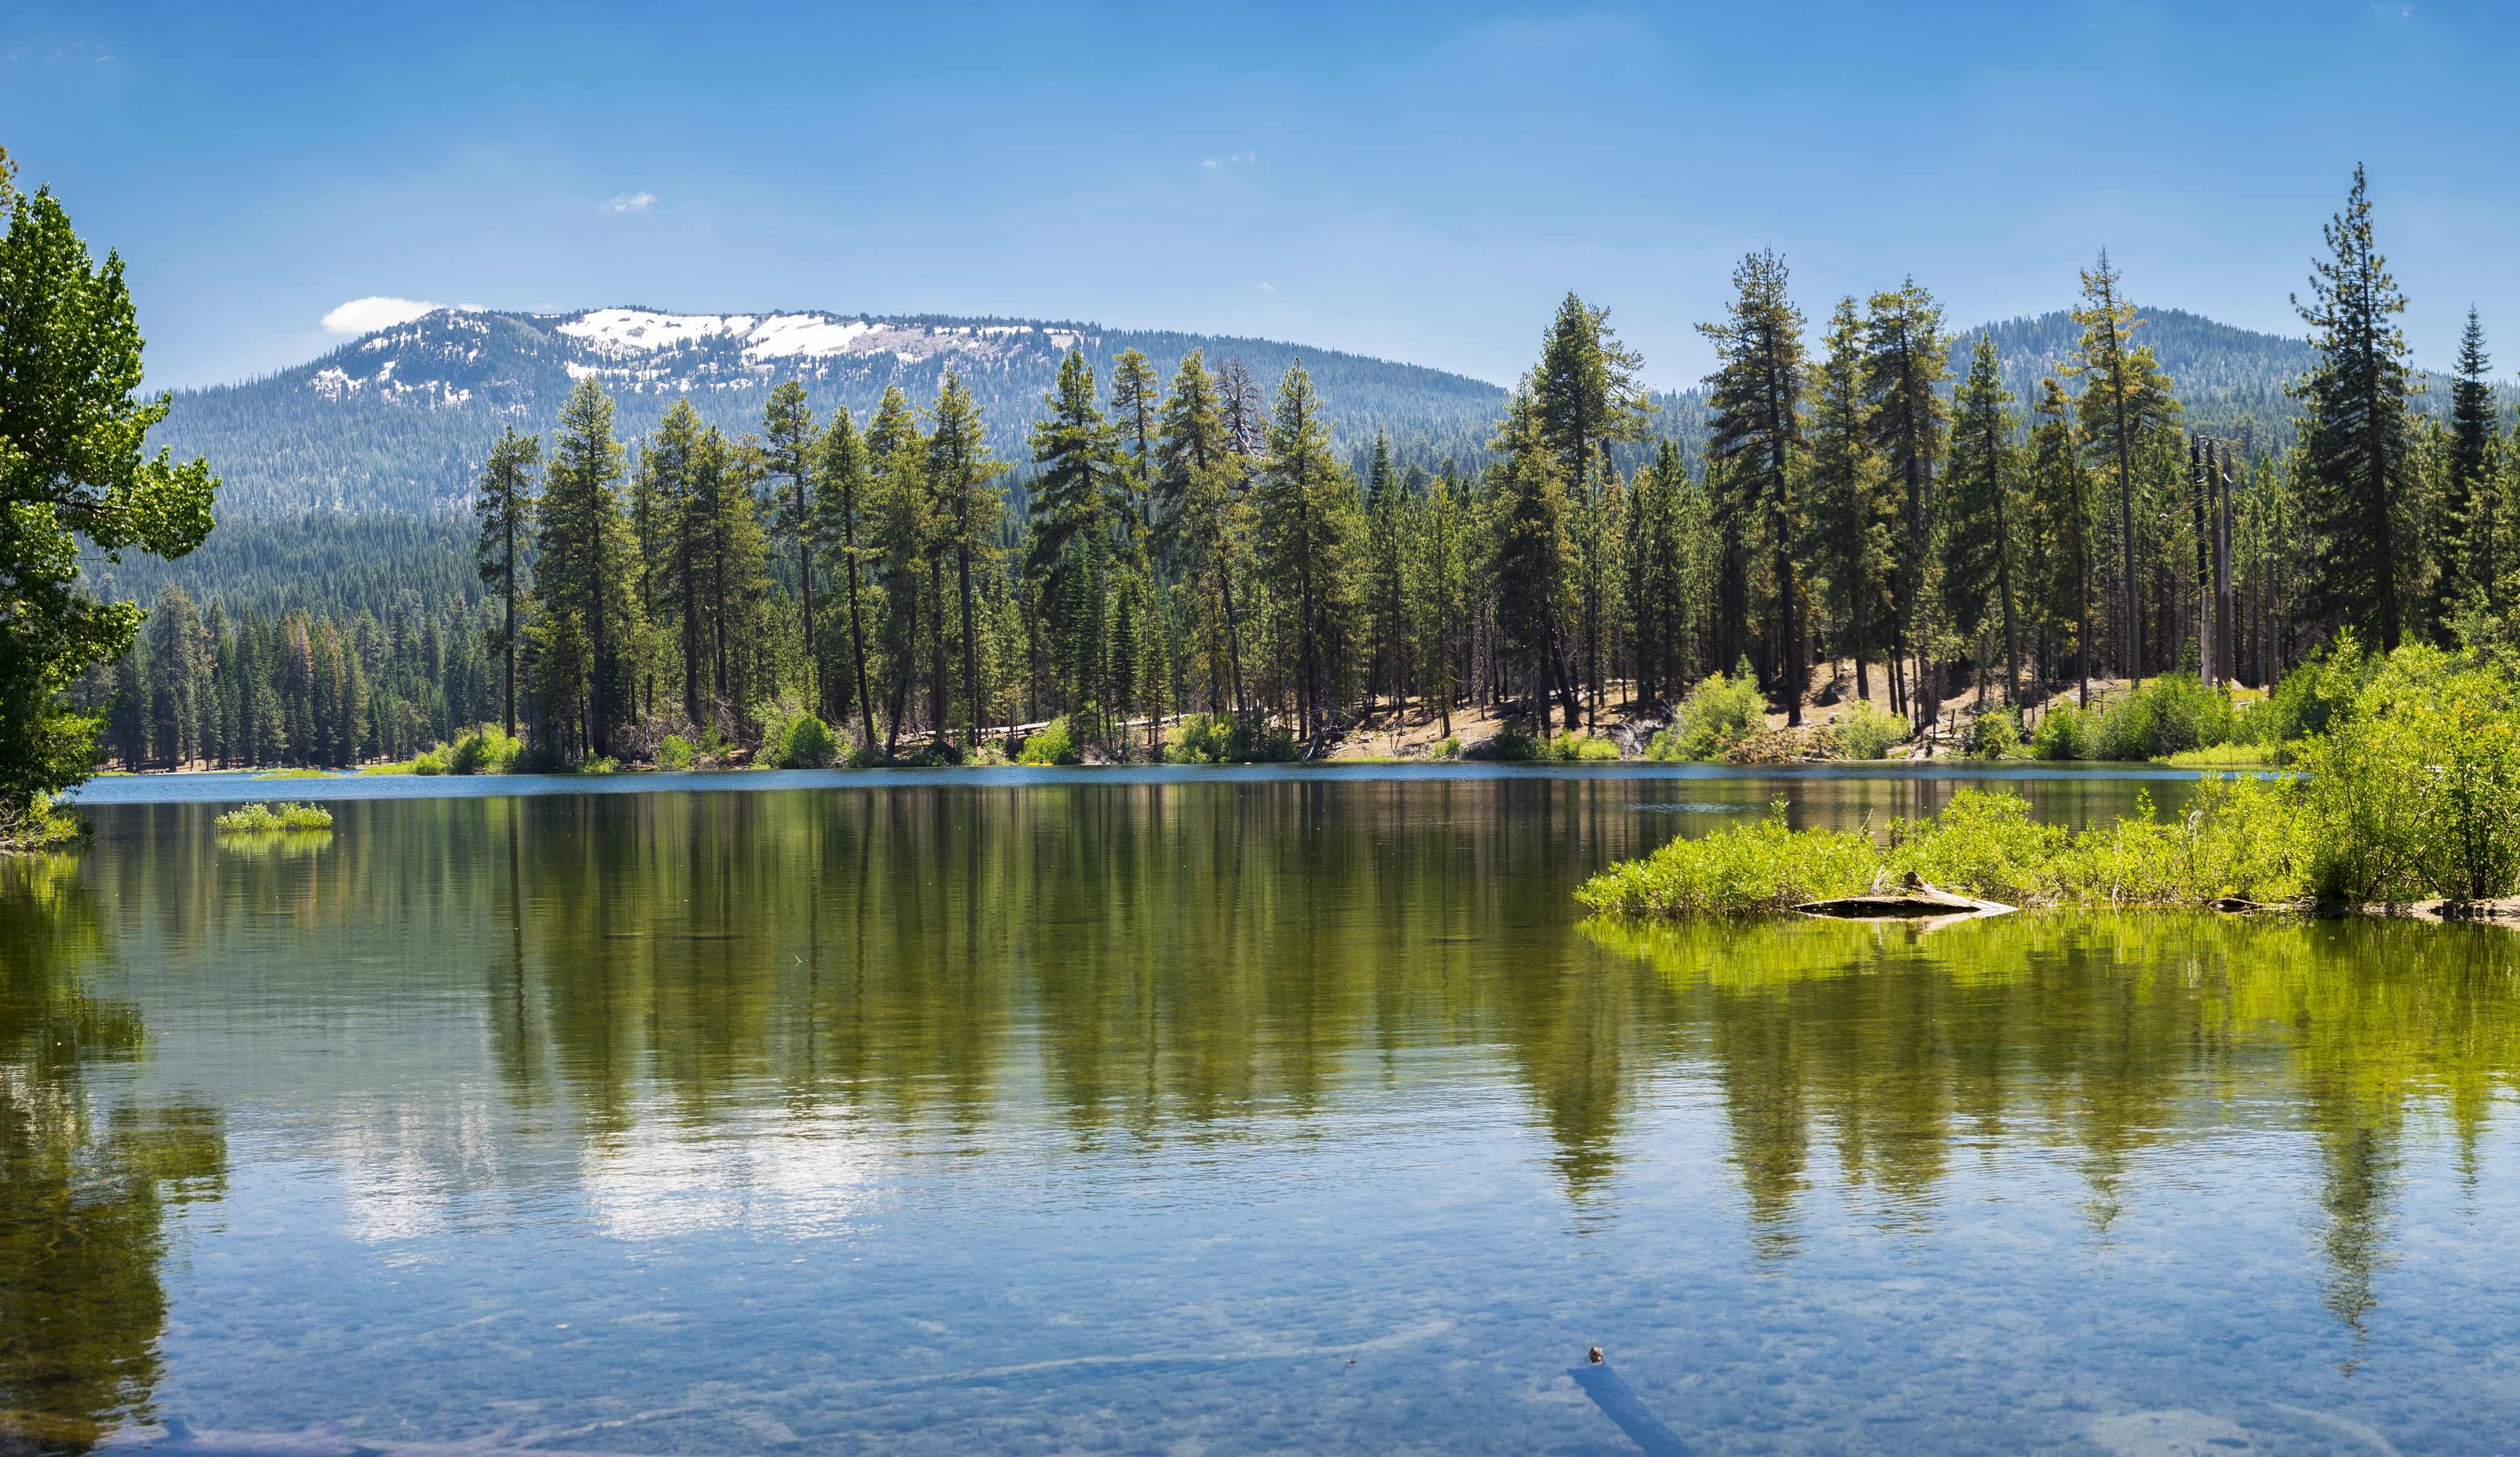 Lassen Volcanic National Park Attractions: Hikes, Lakes, Caves and  Geothermal Areas - California Through My Lens